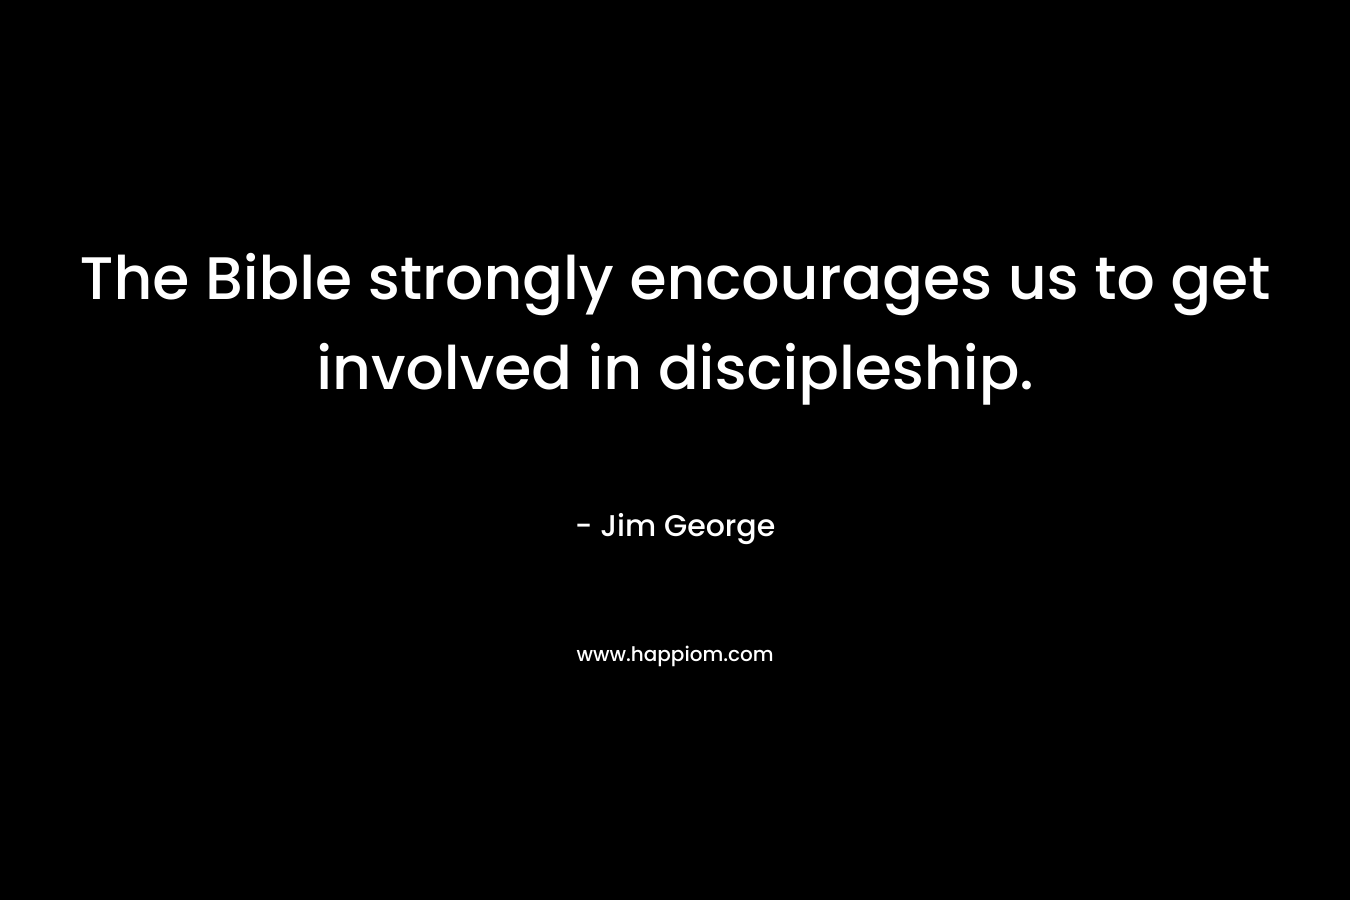 The Bible strongly encourages us to get involved in discipleship. – Jim George